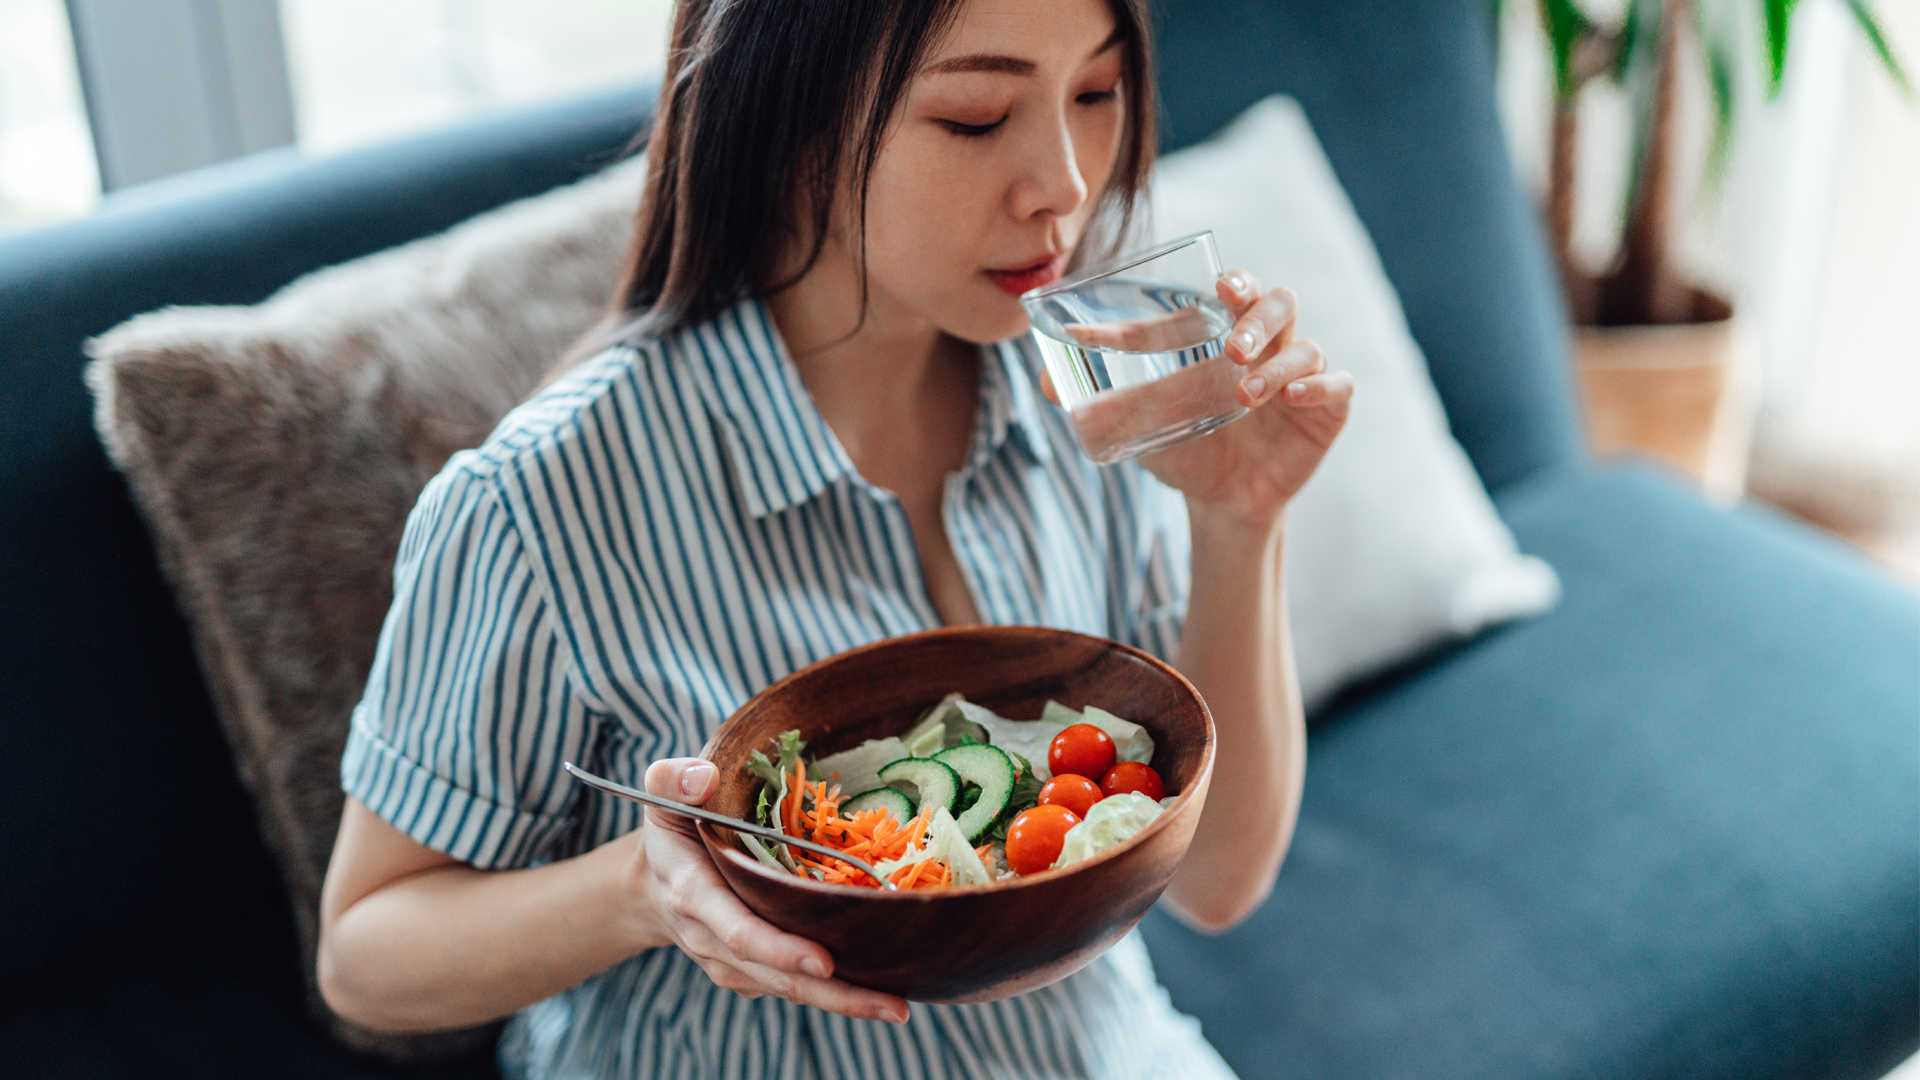 Image of woman eating a healthy meal and drinking water